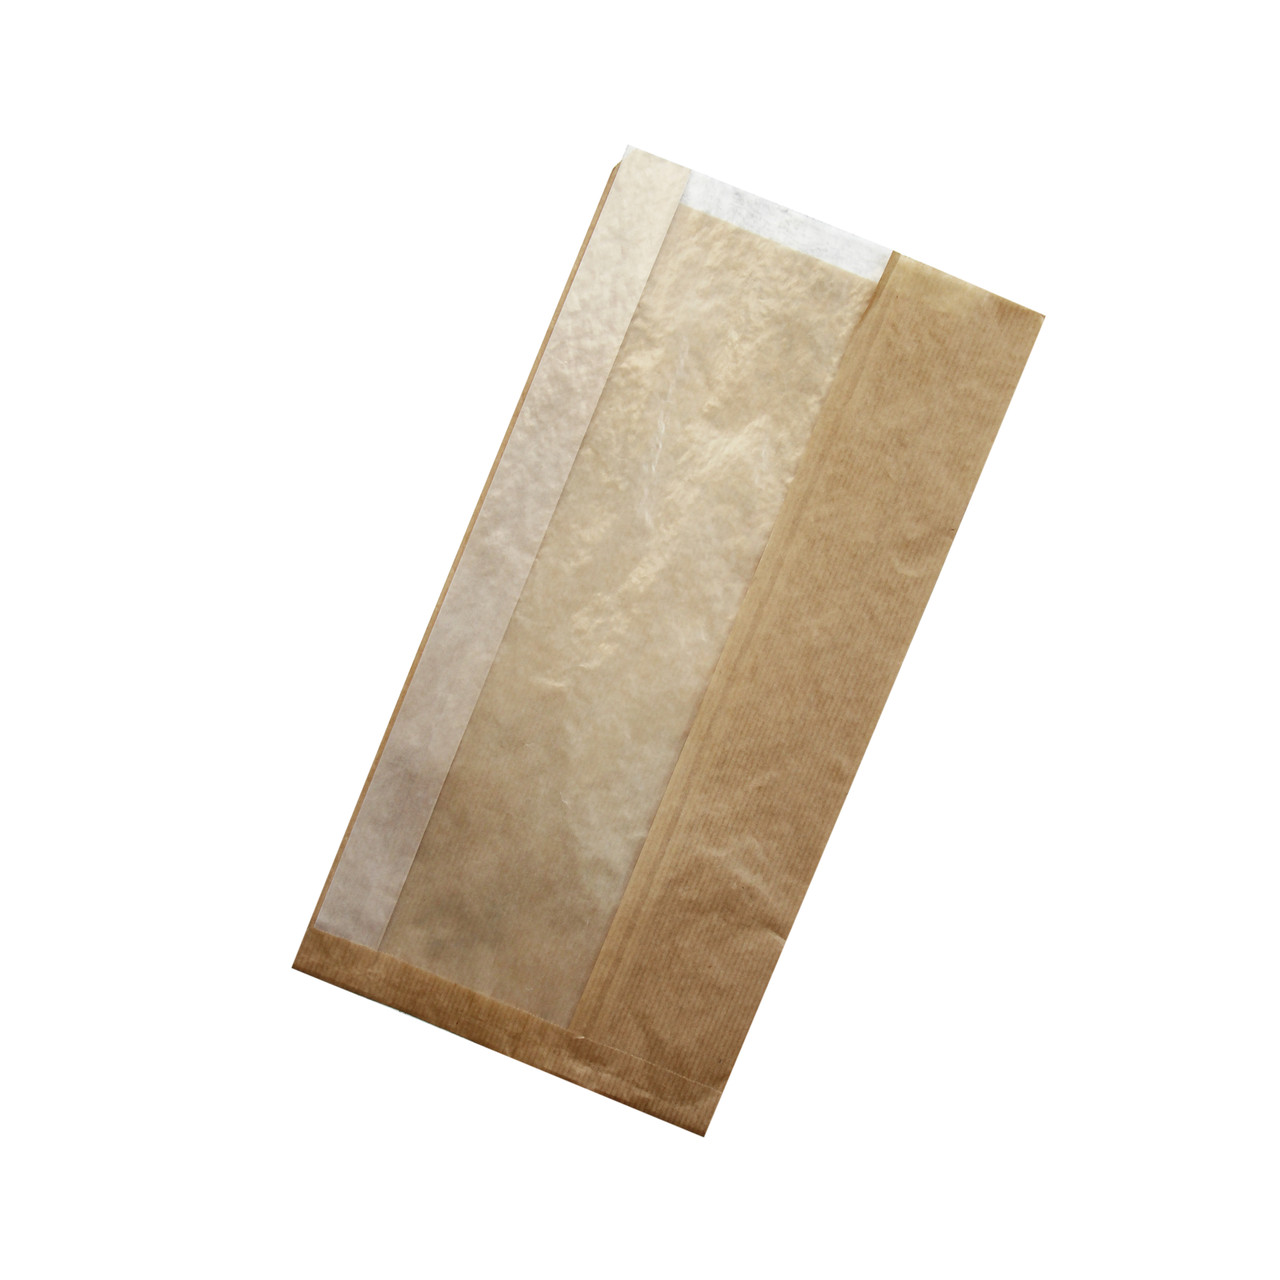 Brown sandwich bag with crystal window L: 15.74in W: 7.9in H: 2.4